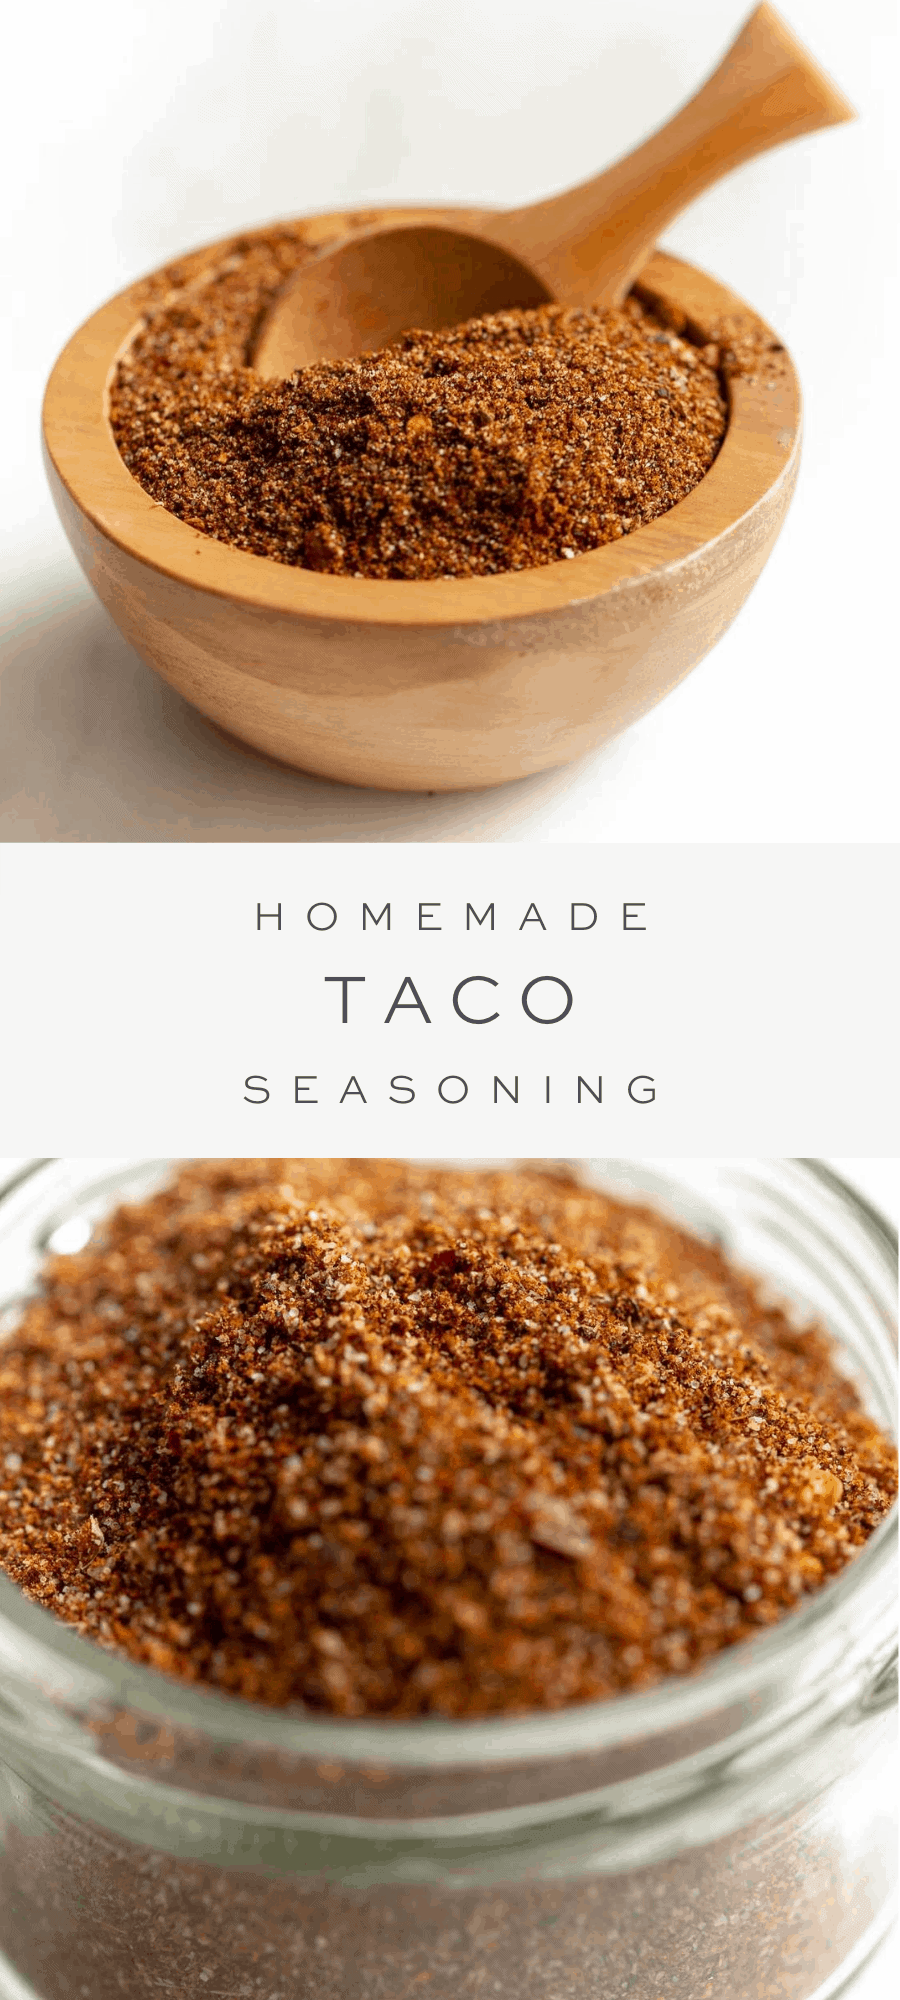 taco seasoning in wooden bowl with wooden spoon, overlay text, close up of taco seasoning